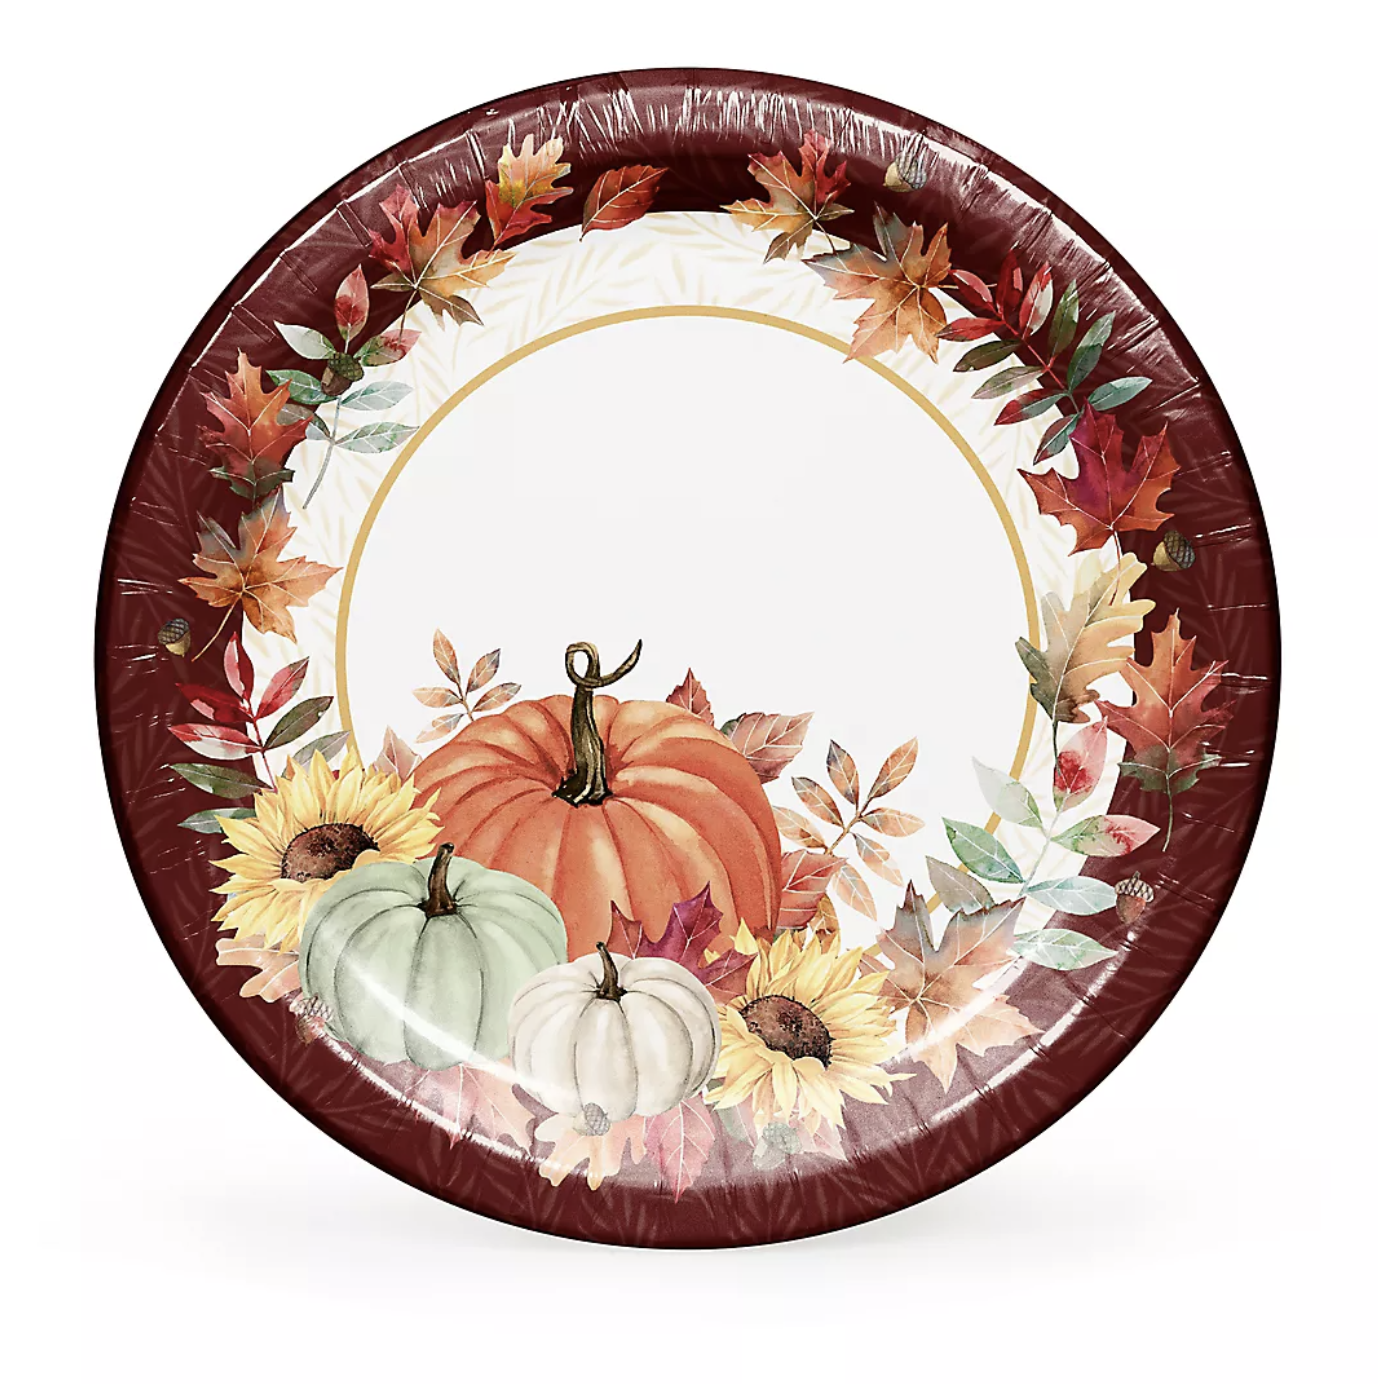 Product image of paper plates with pumpkin and foliage design